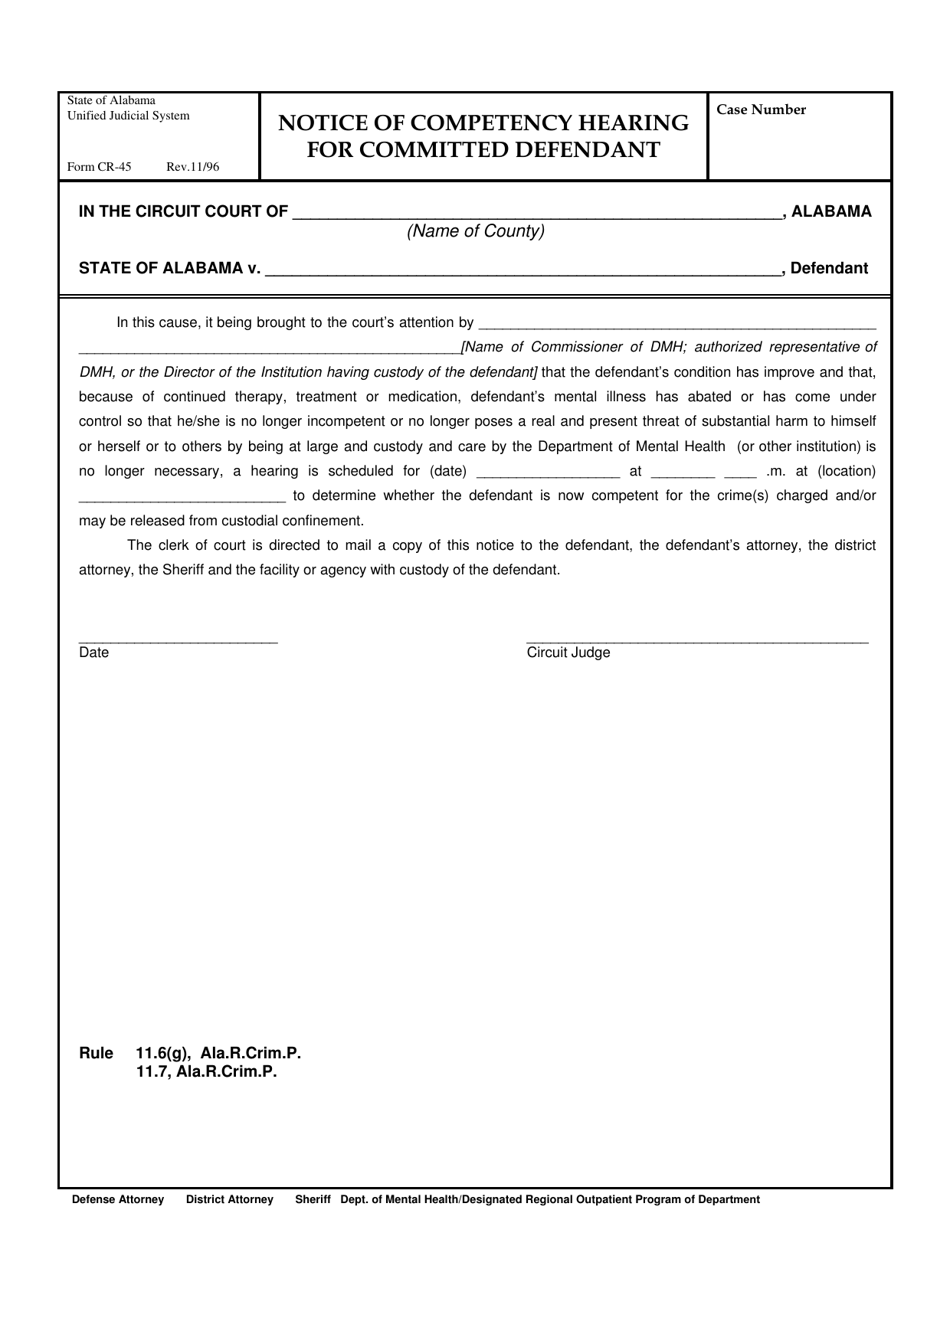 Form CR-45 Notice of Competency Hearing for Committed Defendant - Alabama, Page 1